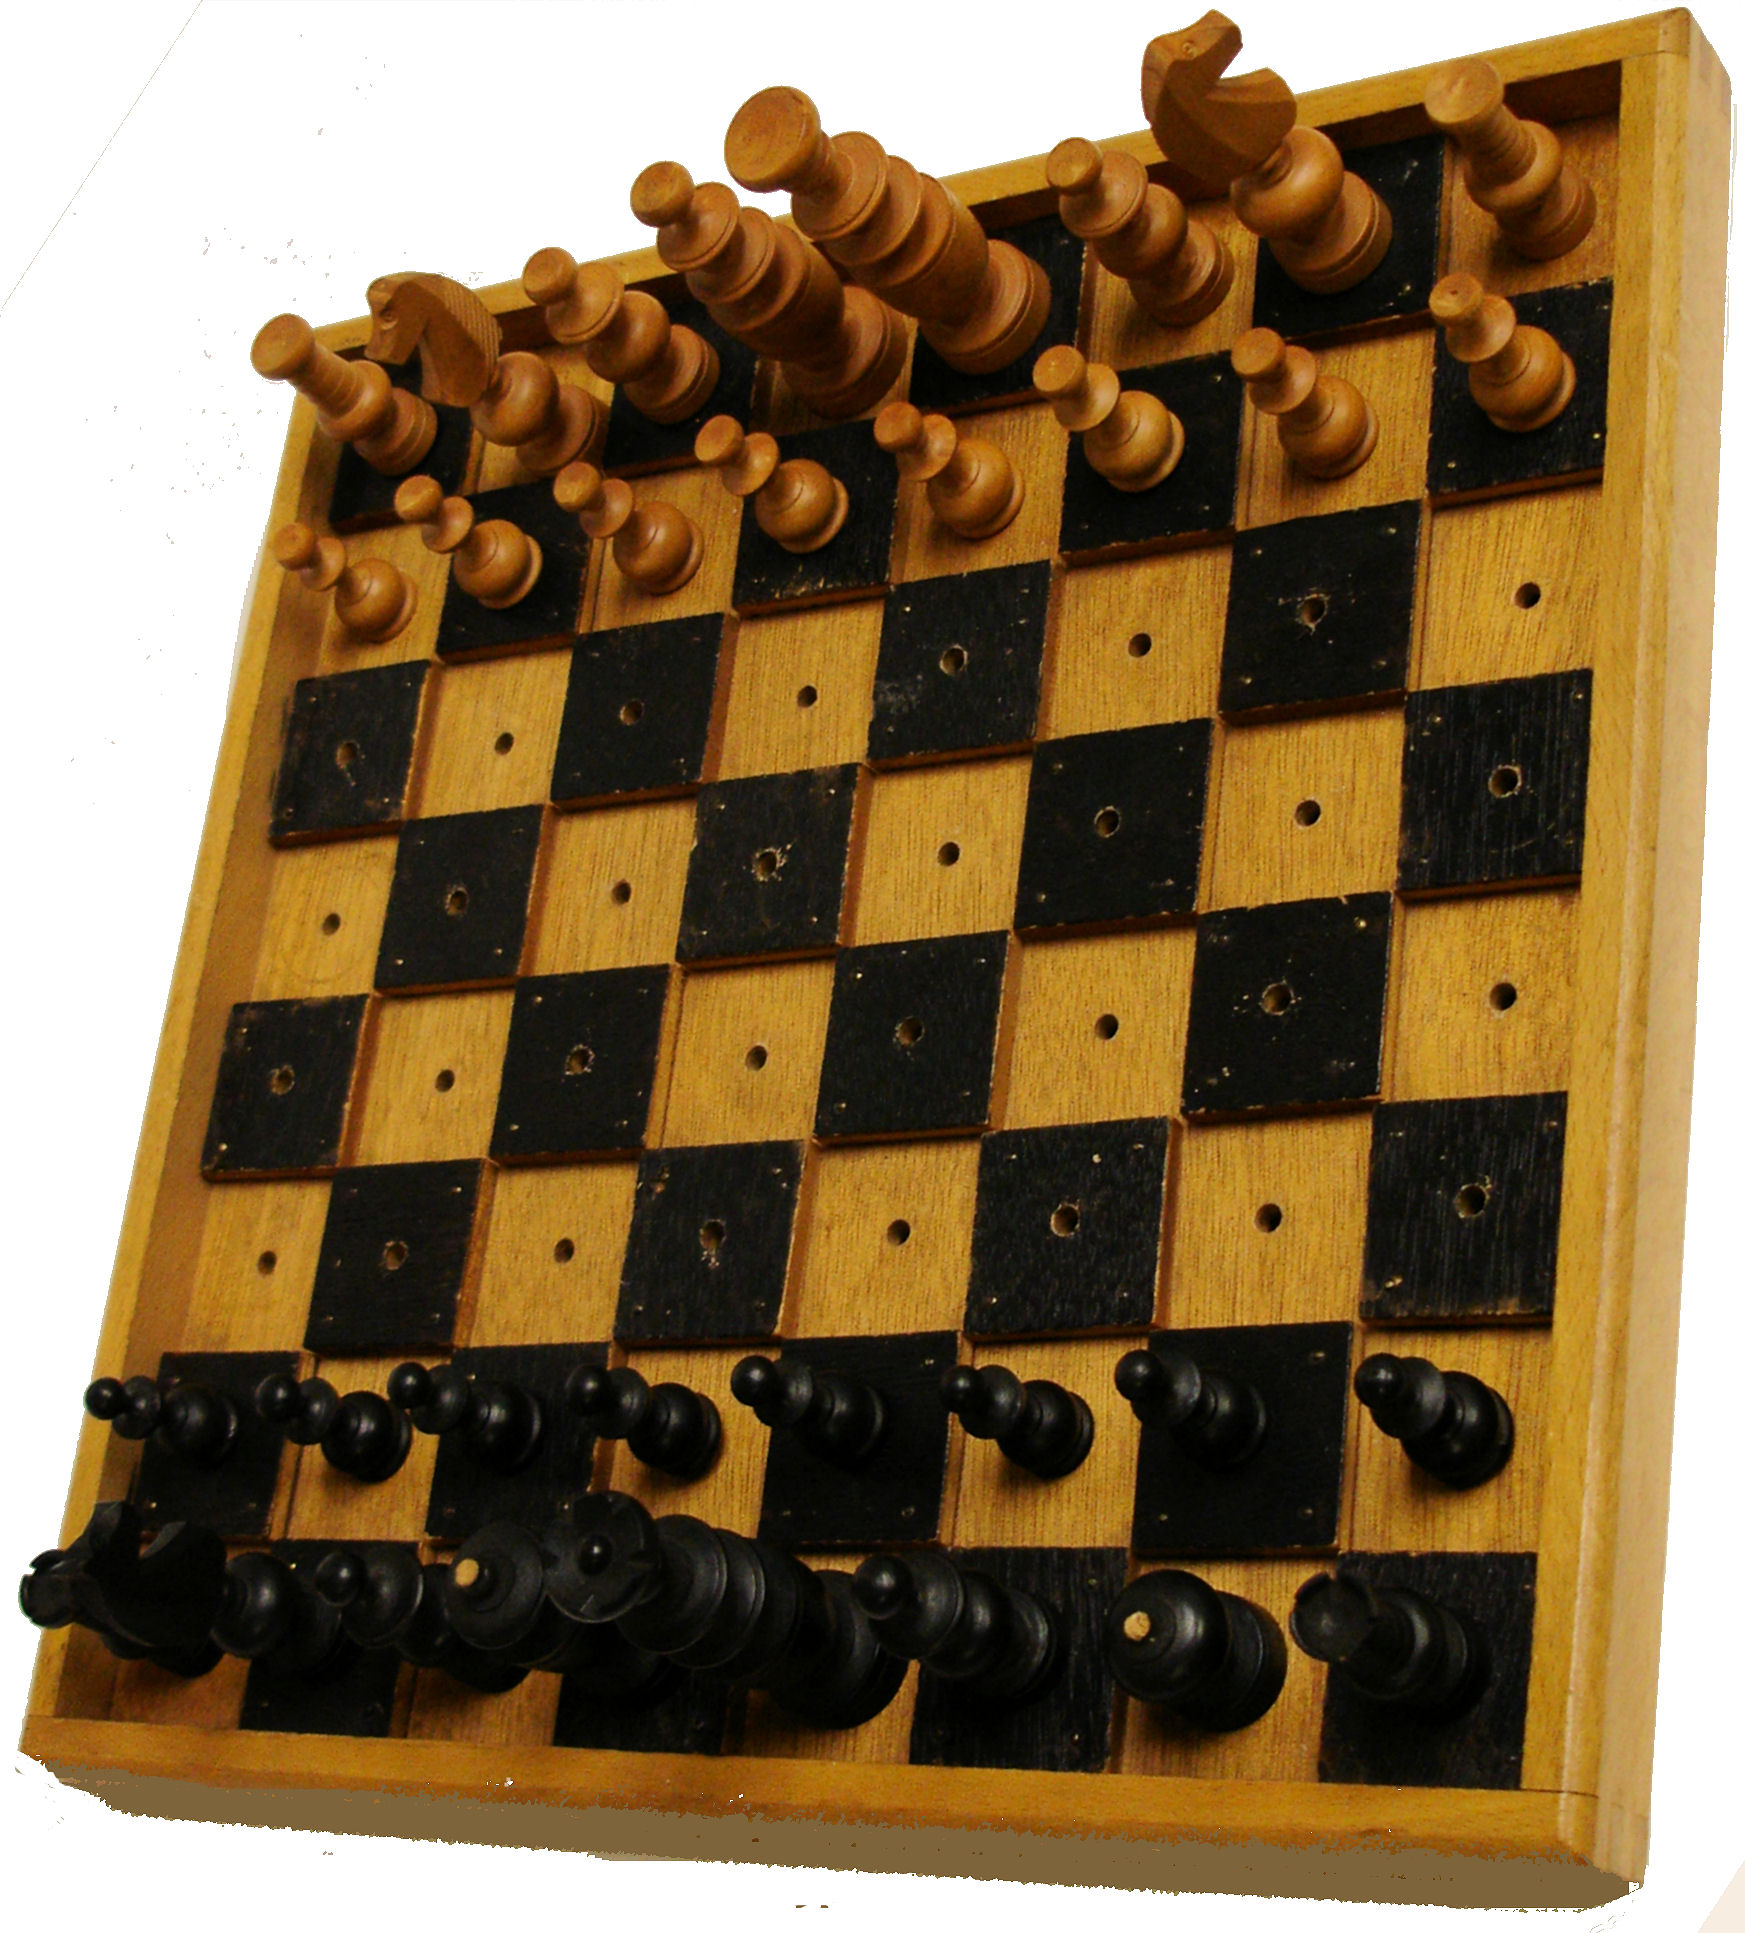 Overview of Braille chess board